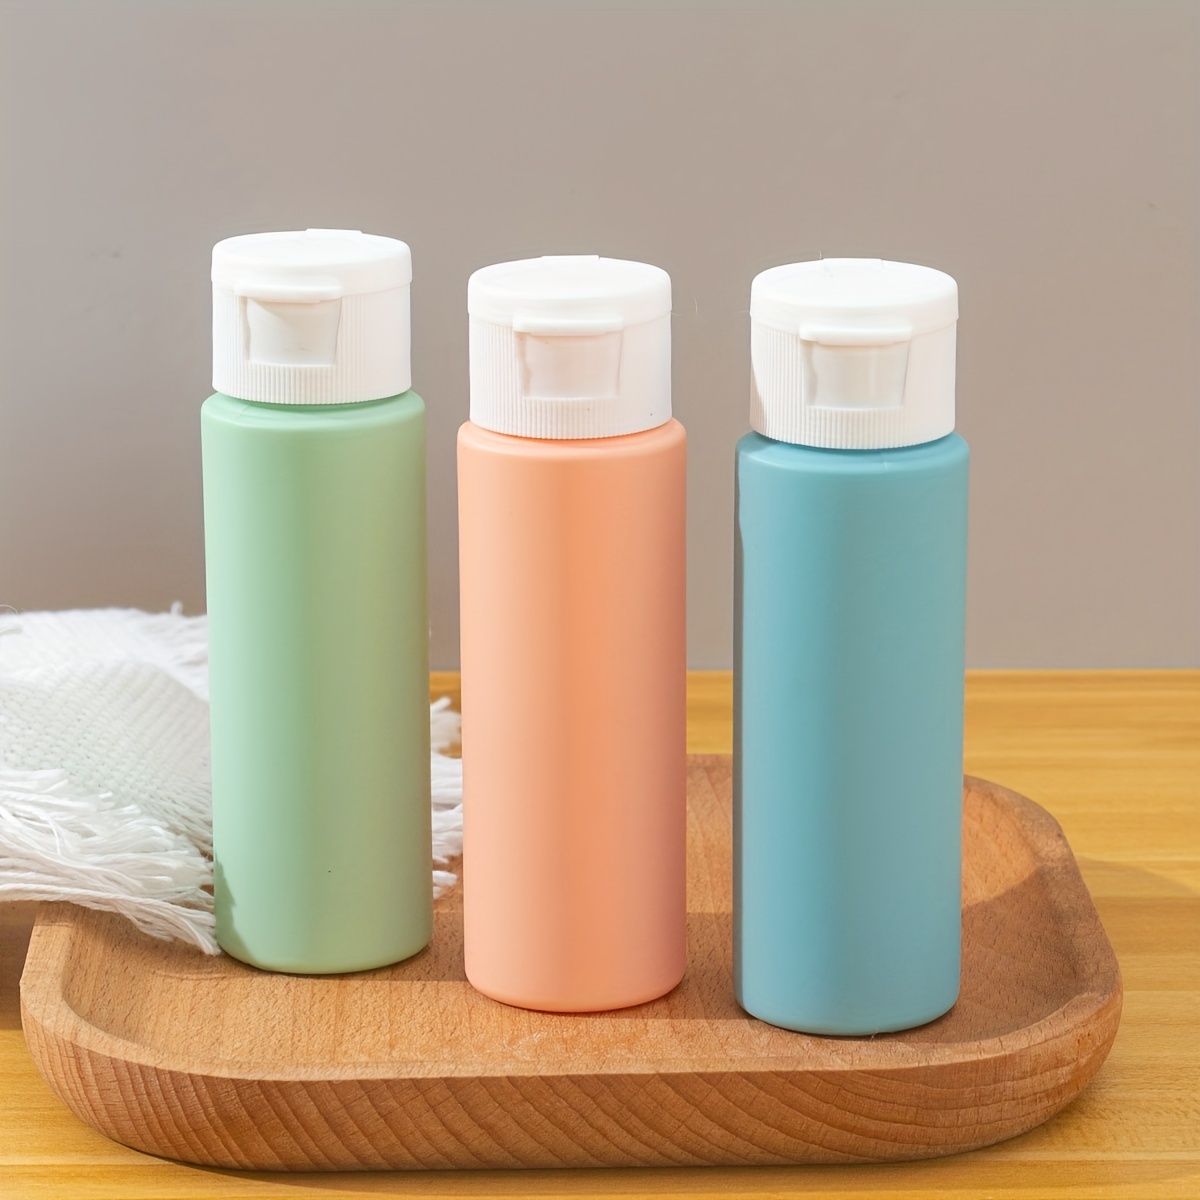 

1pc 50ml Portable Travel Bottle, Leakproof Refillable Cosmetic Containers, Silicone Dispenser For Shampoo/lotion/conditioner, Easy Squeeze Air Travel Accessories